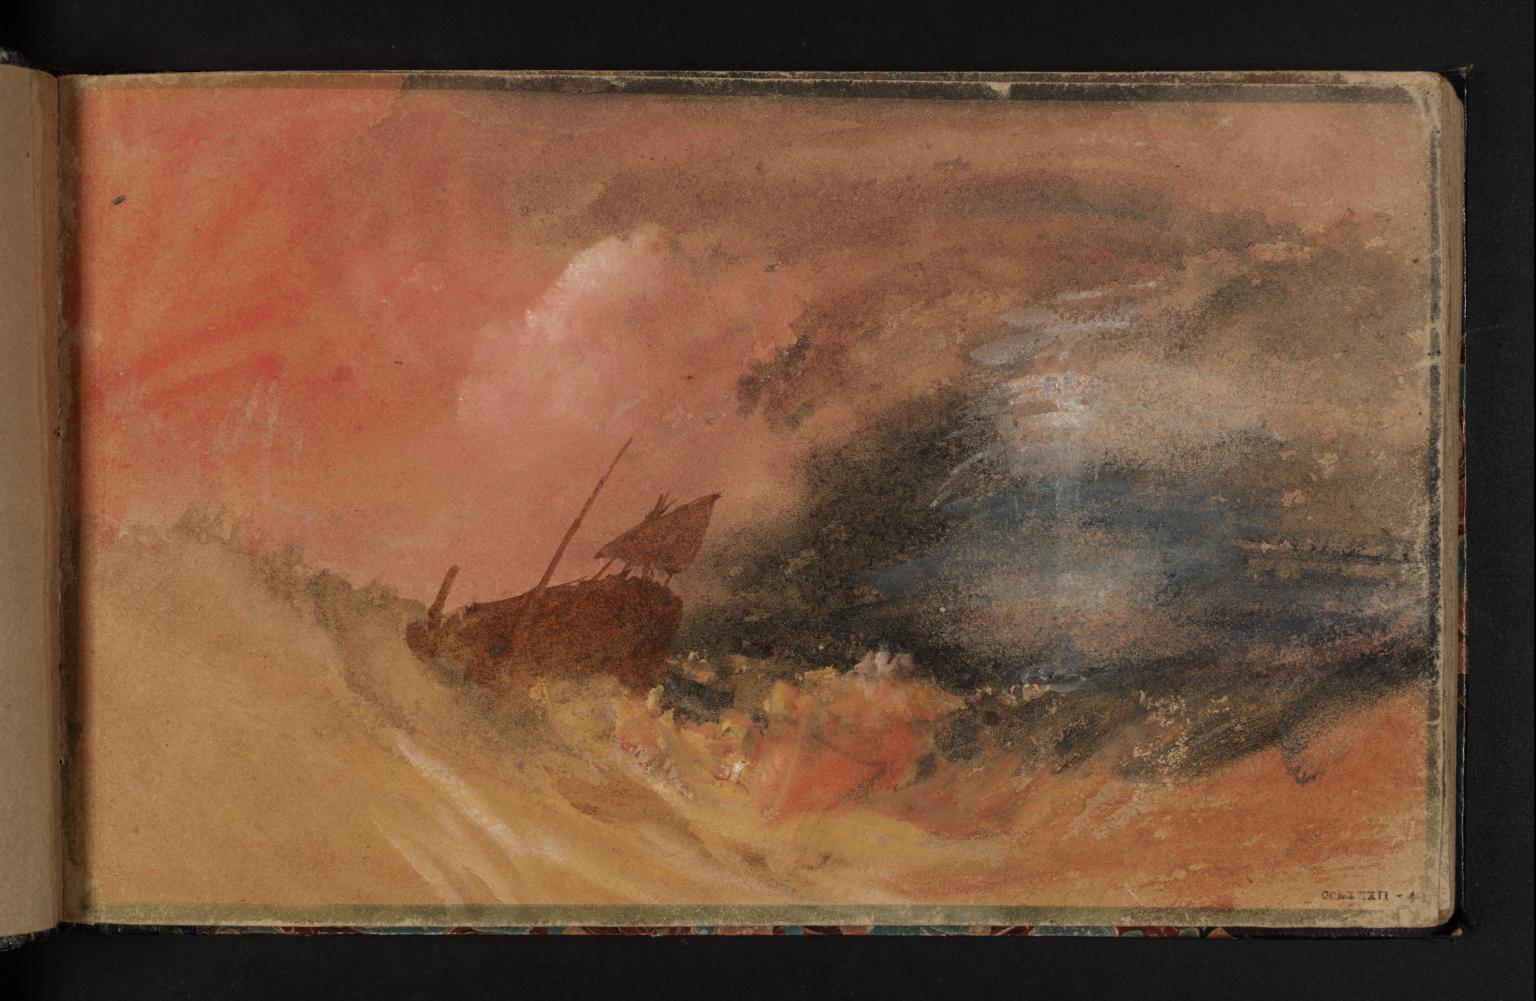 i>from</i> Swans Sketchbook [Finberg XLII], Bristol: Shipping in the  Harbour, Joseph Mallord William Turner, 1798